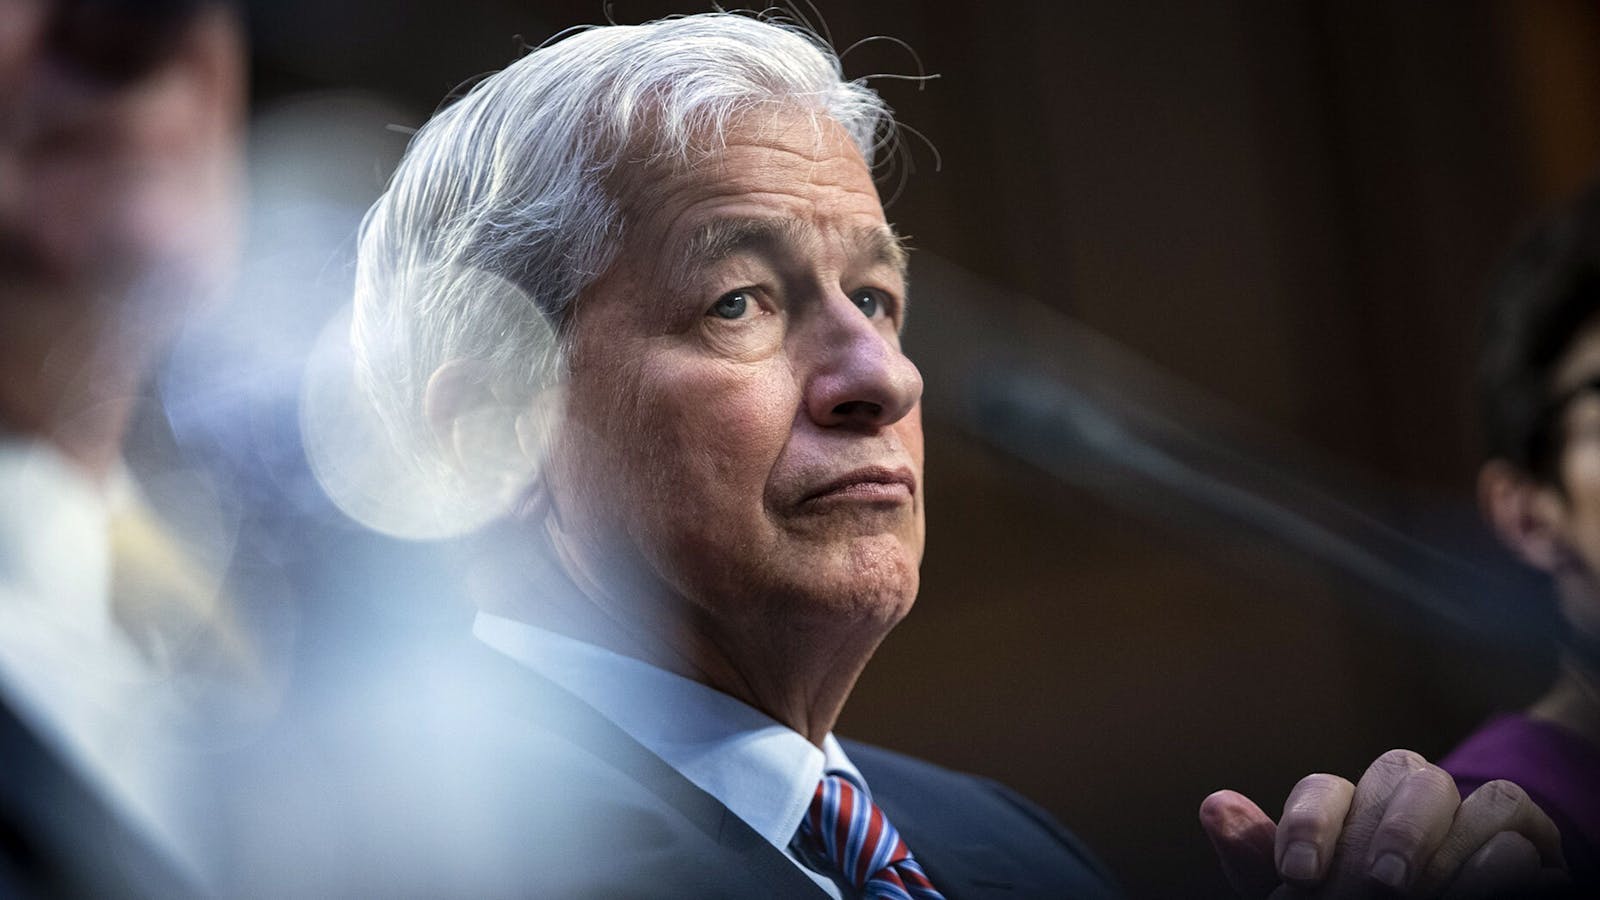 Jamie Dimon, chairman and CEO of JPMorgan Chase & Co. Photo by Bloomberg.